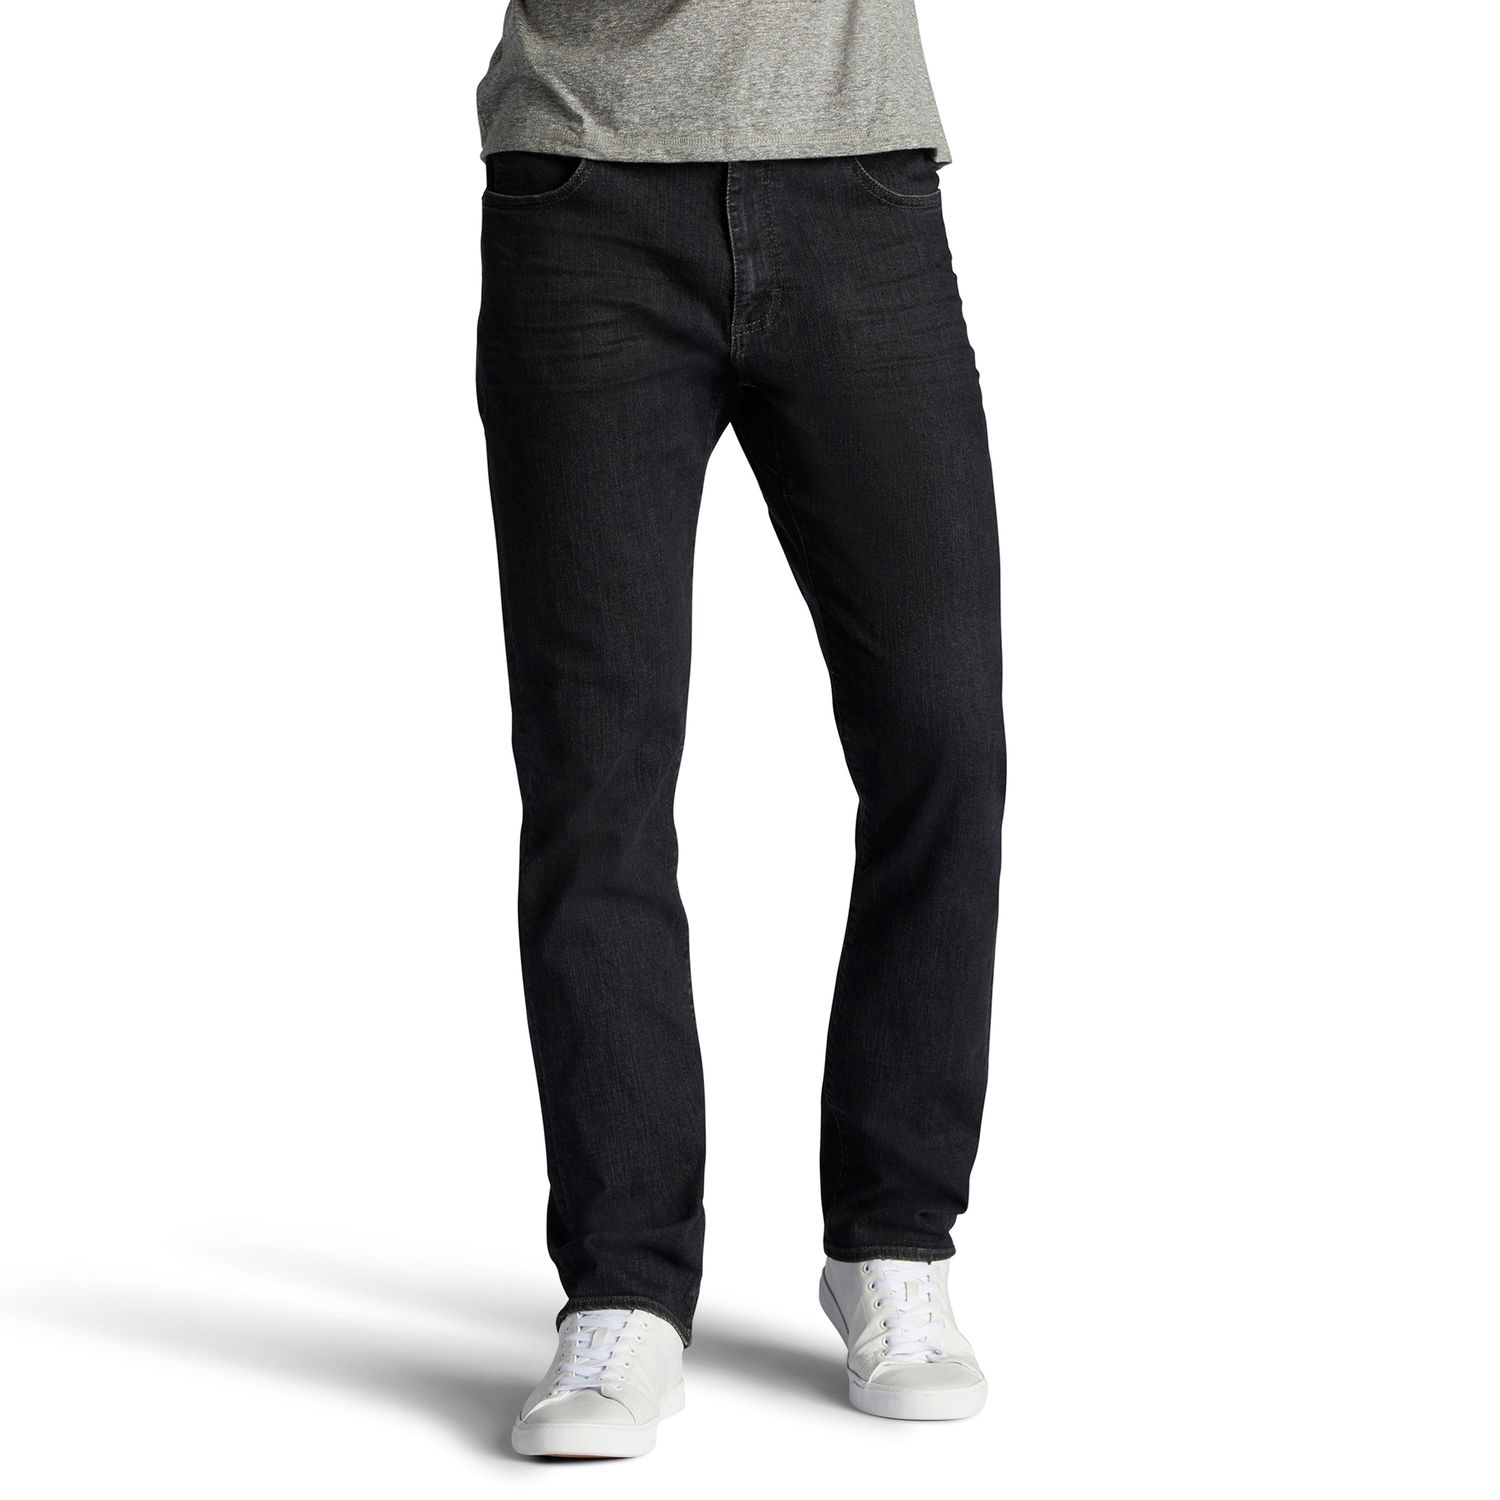 Extreme Motion Stretch Athletic-Fit Jeans